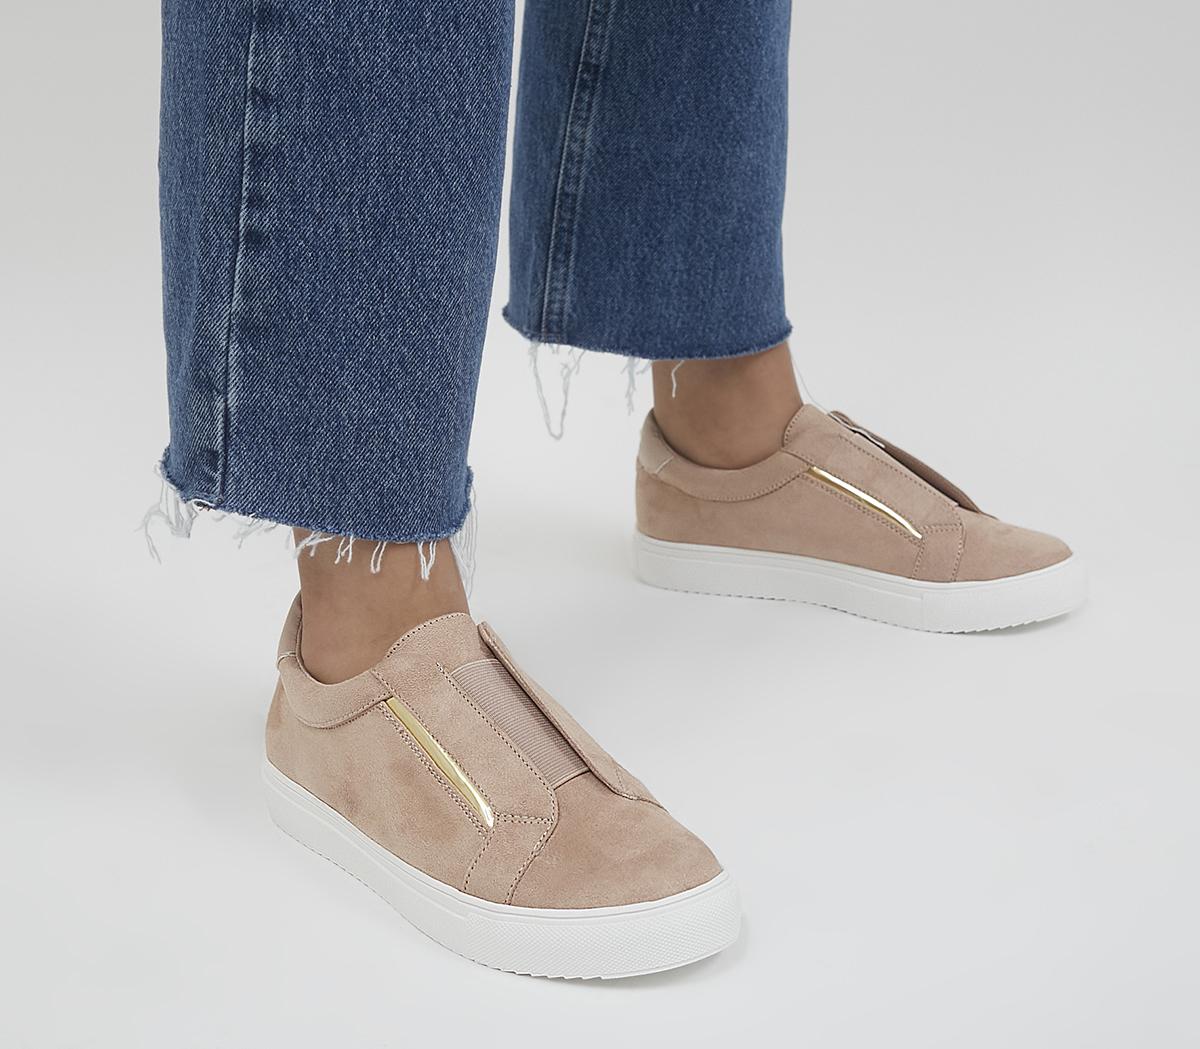 Slip-on Shoes brown-nude casual look Shoes Low Shoes Slip-on Shoes 